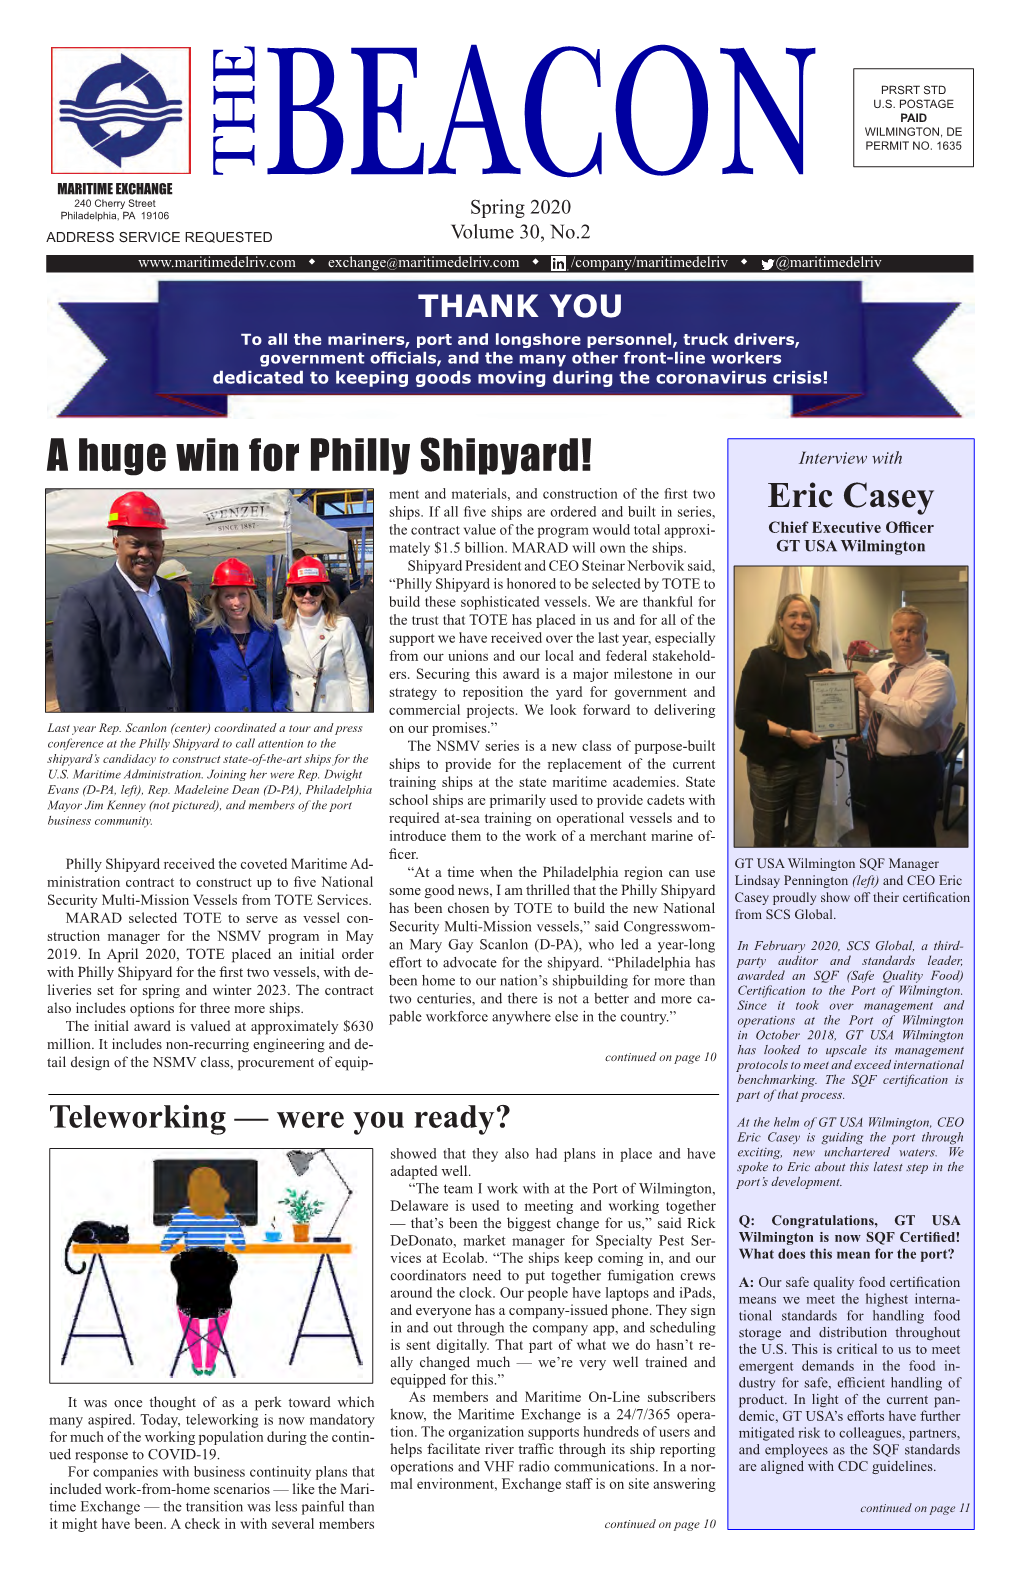 A Huge Win for Philly Shipyard! Interview with Ment and Materials, and Construction of the First Two Ships